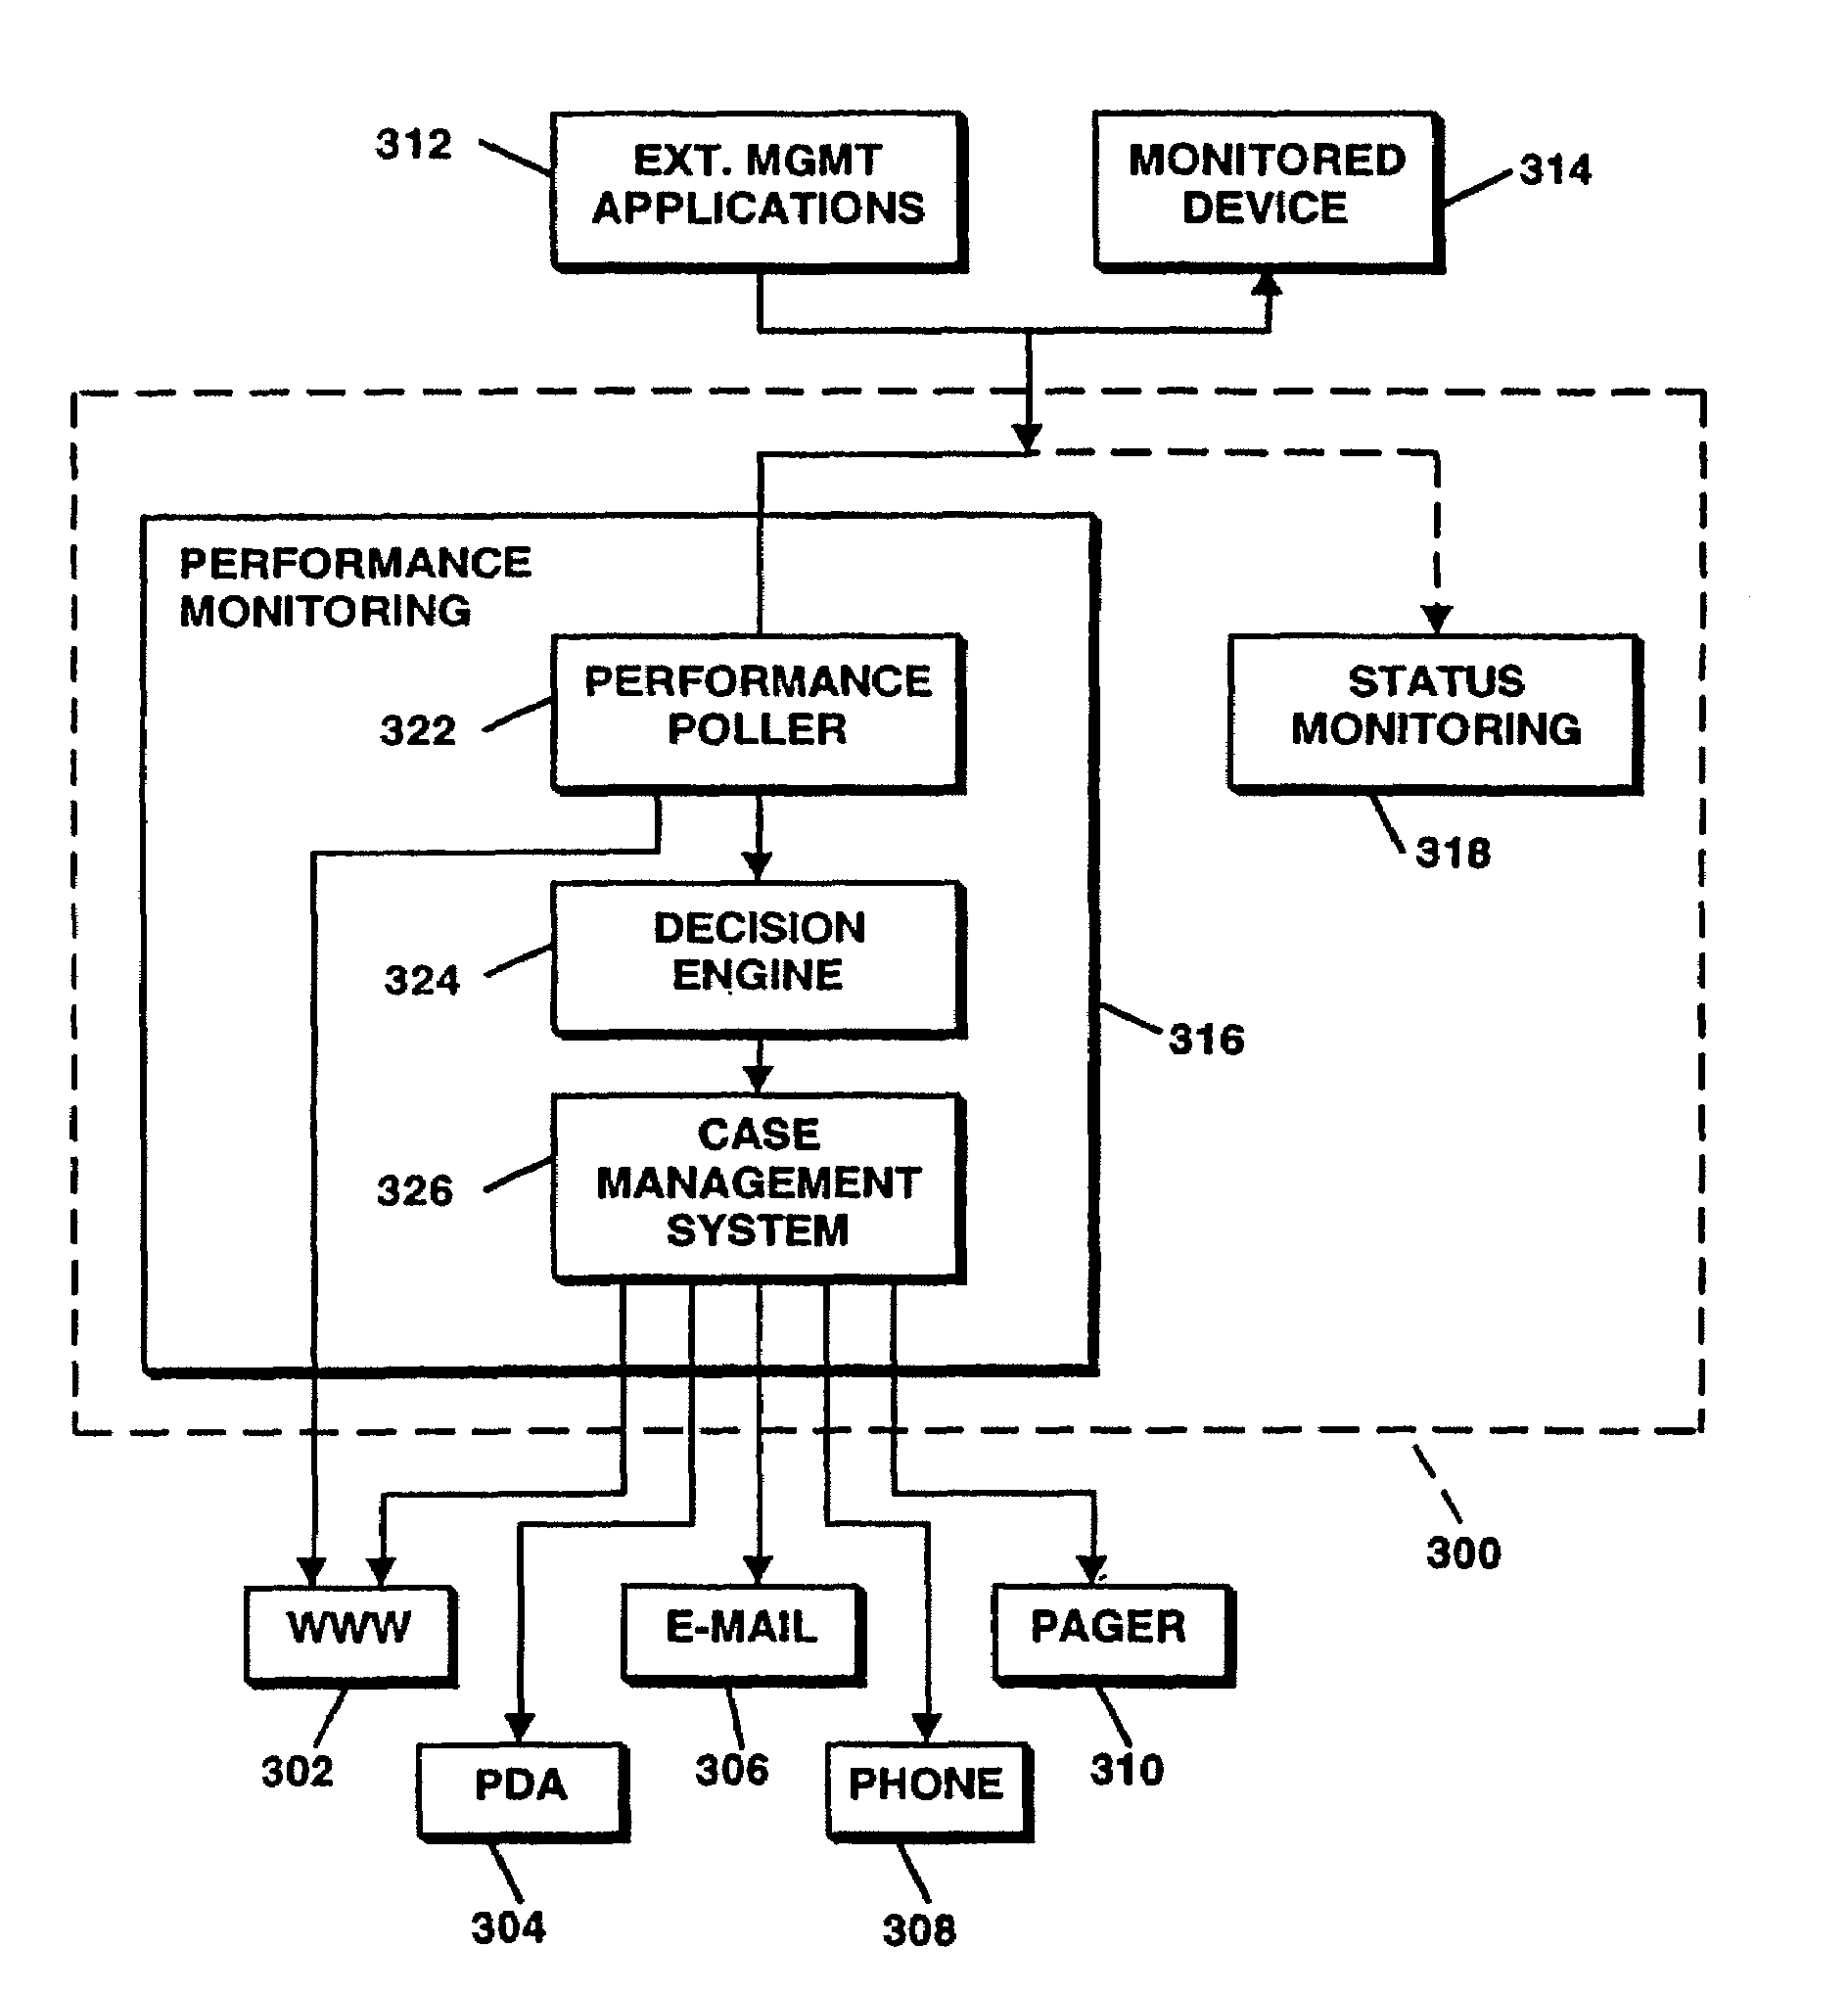 Method and apparatus for maintaining the status of objects in computer networks using virtual state machines